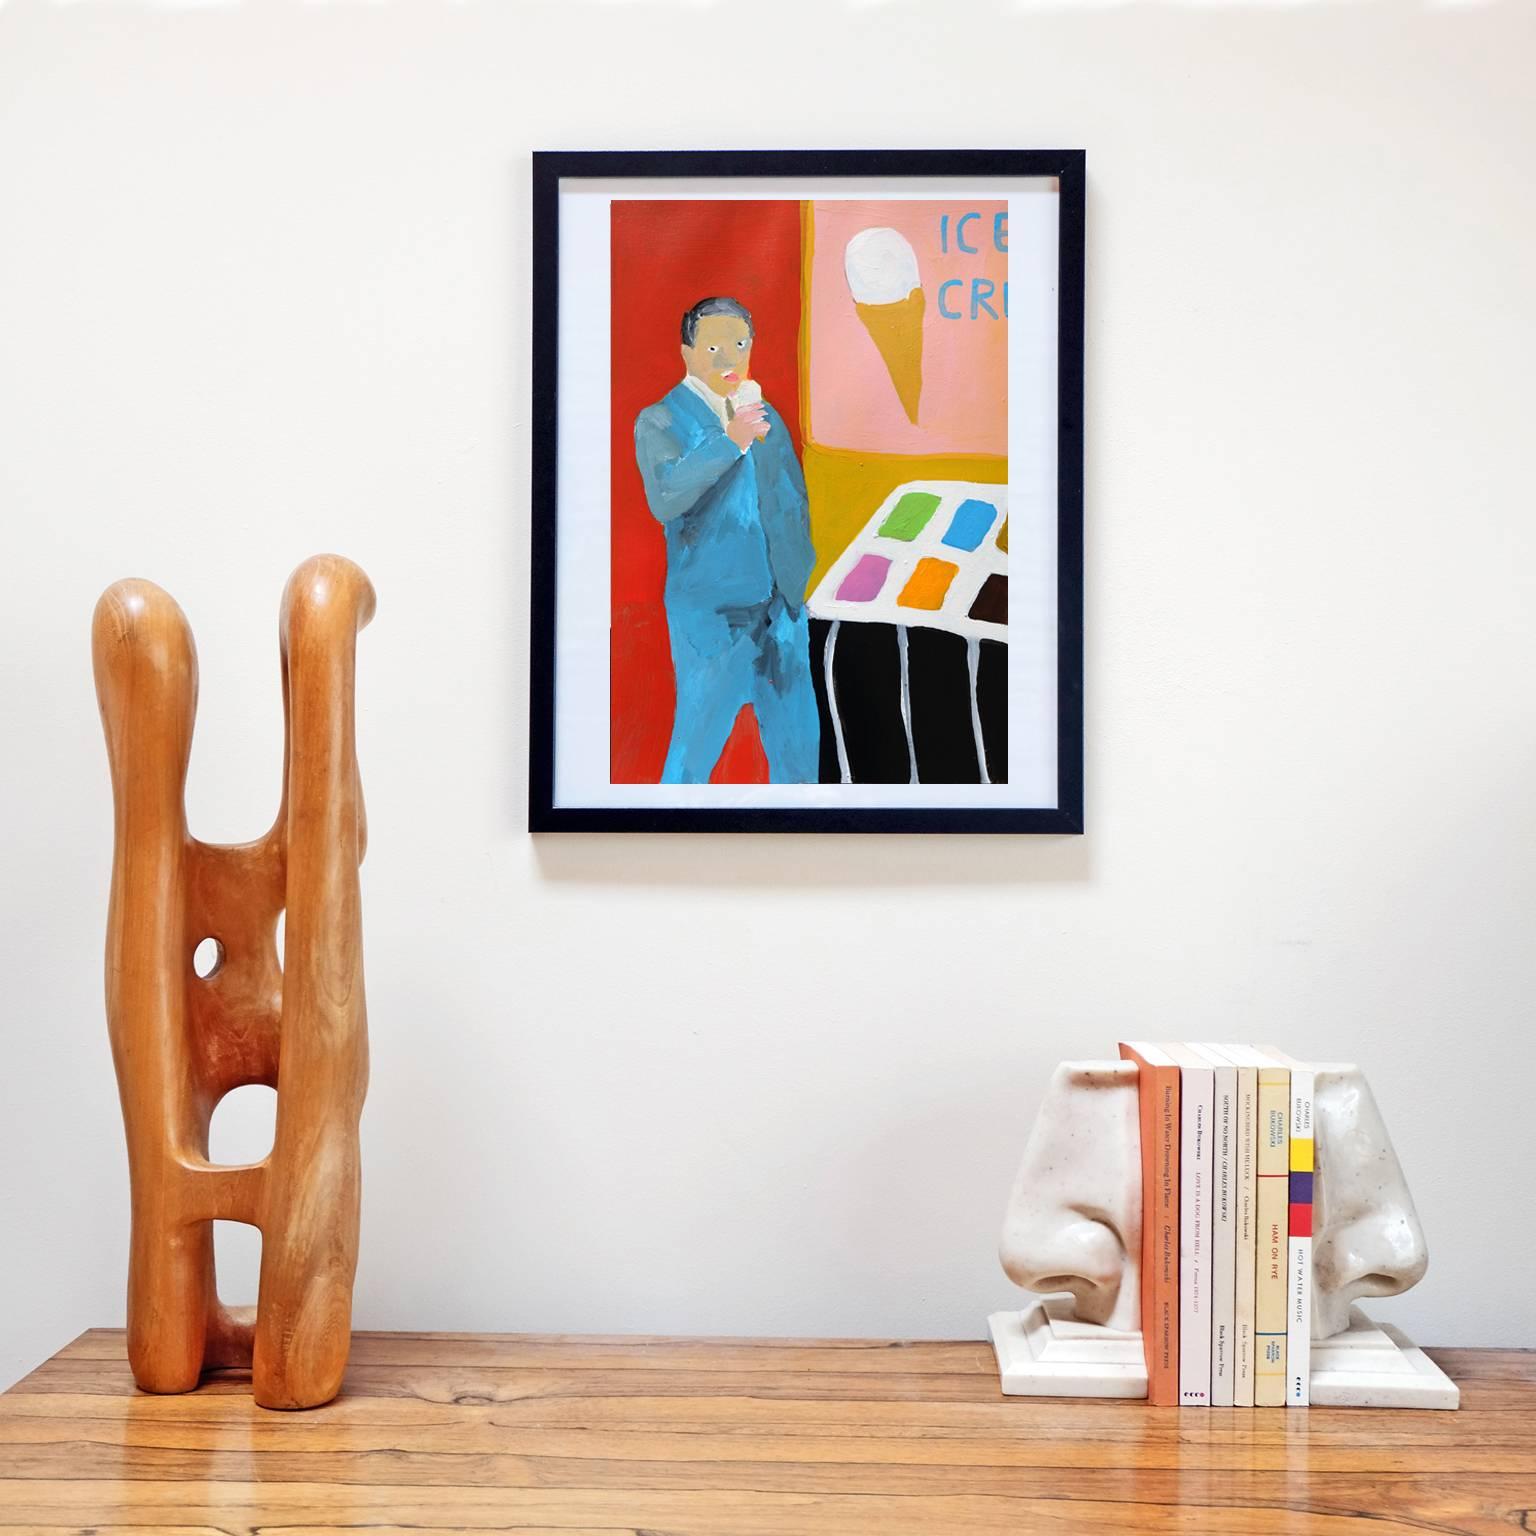 Acrylic on paper by Alan Fears, 2017. 

Unframed. The frame is for display purposes only.

Alan Fears (b. 1974) is an emerging British artist who is shortlisted for the John Moores Painting Prize 2018.

'A naive artist, a graphic artist, a pop